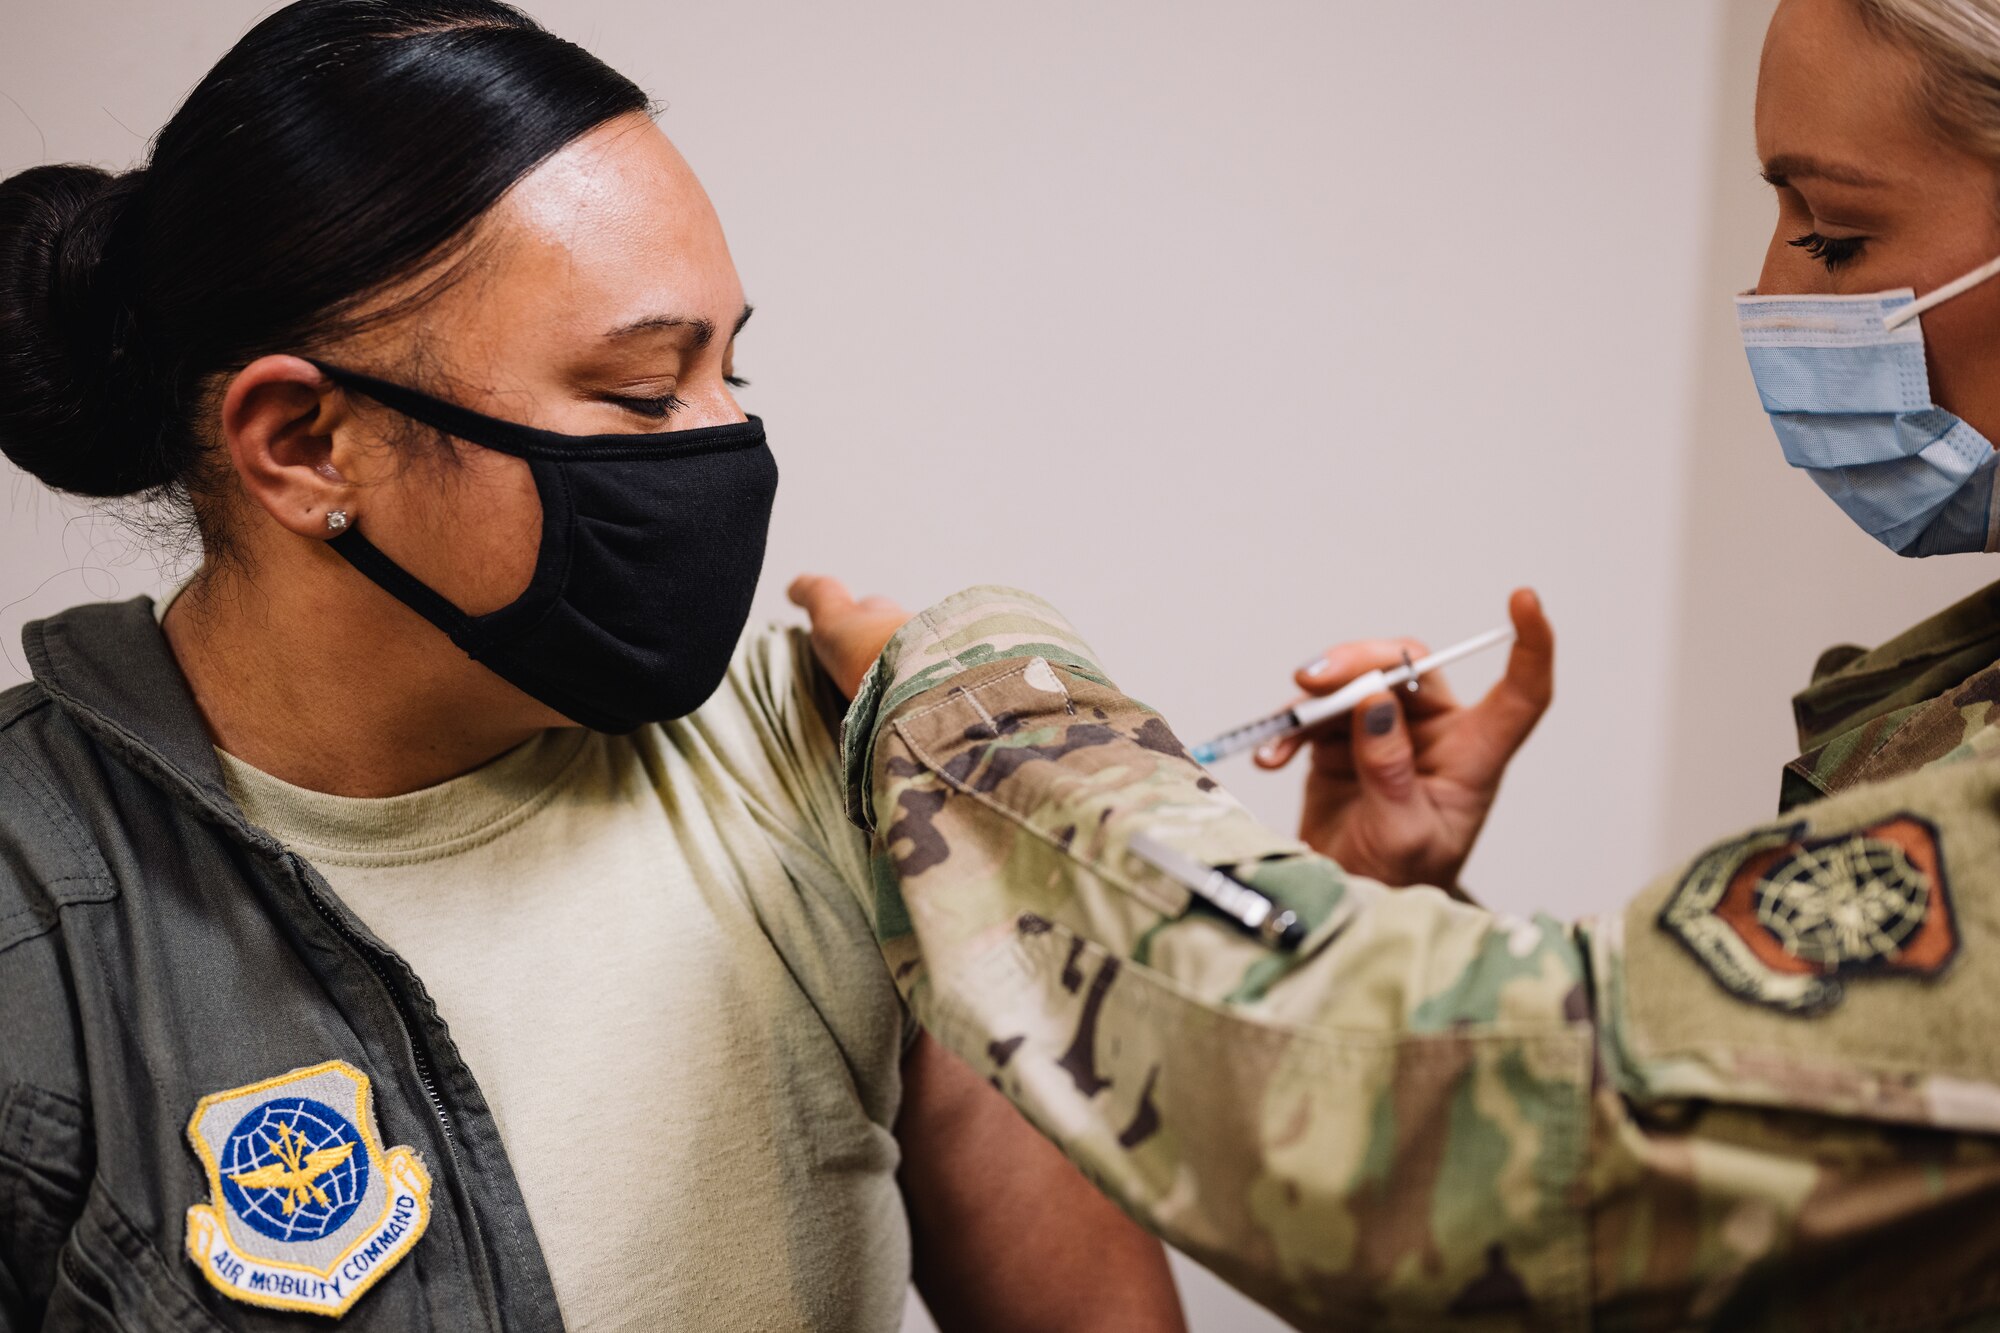 Master Sgt. Renee Cheatham, 375th Aeromedical Evacuation Squadron aeromedical evacuation technician, receives one the first COVID-19 inoculations on Scott Air Force Base, Ill., Jan 6, 2021. The COVID-19 vaccines will be available on a voluntary basis in which early vaccination participation is highly encouraged for priority personnel; masks and physical distancing will still be necessary until a large proportion of the population is vaccinated and the vaccine is proven to provide long-term protection. (U.S. Air Force photo by Tech. Sgt. Jordan Castelan)